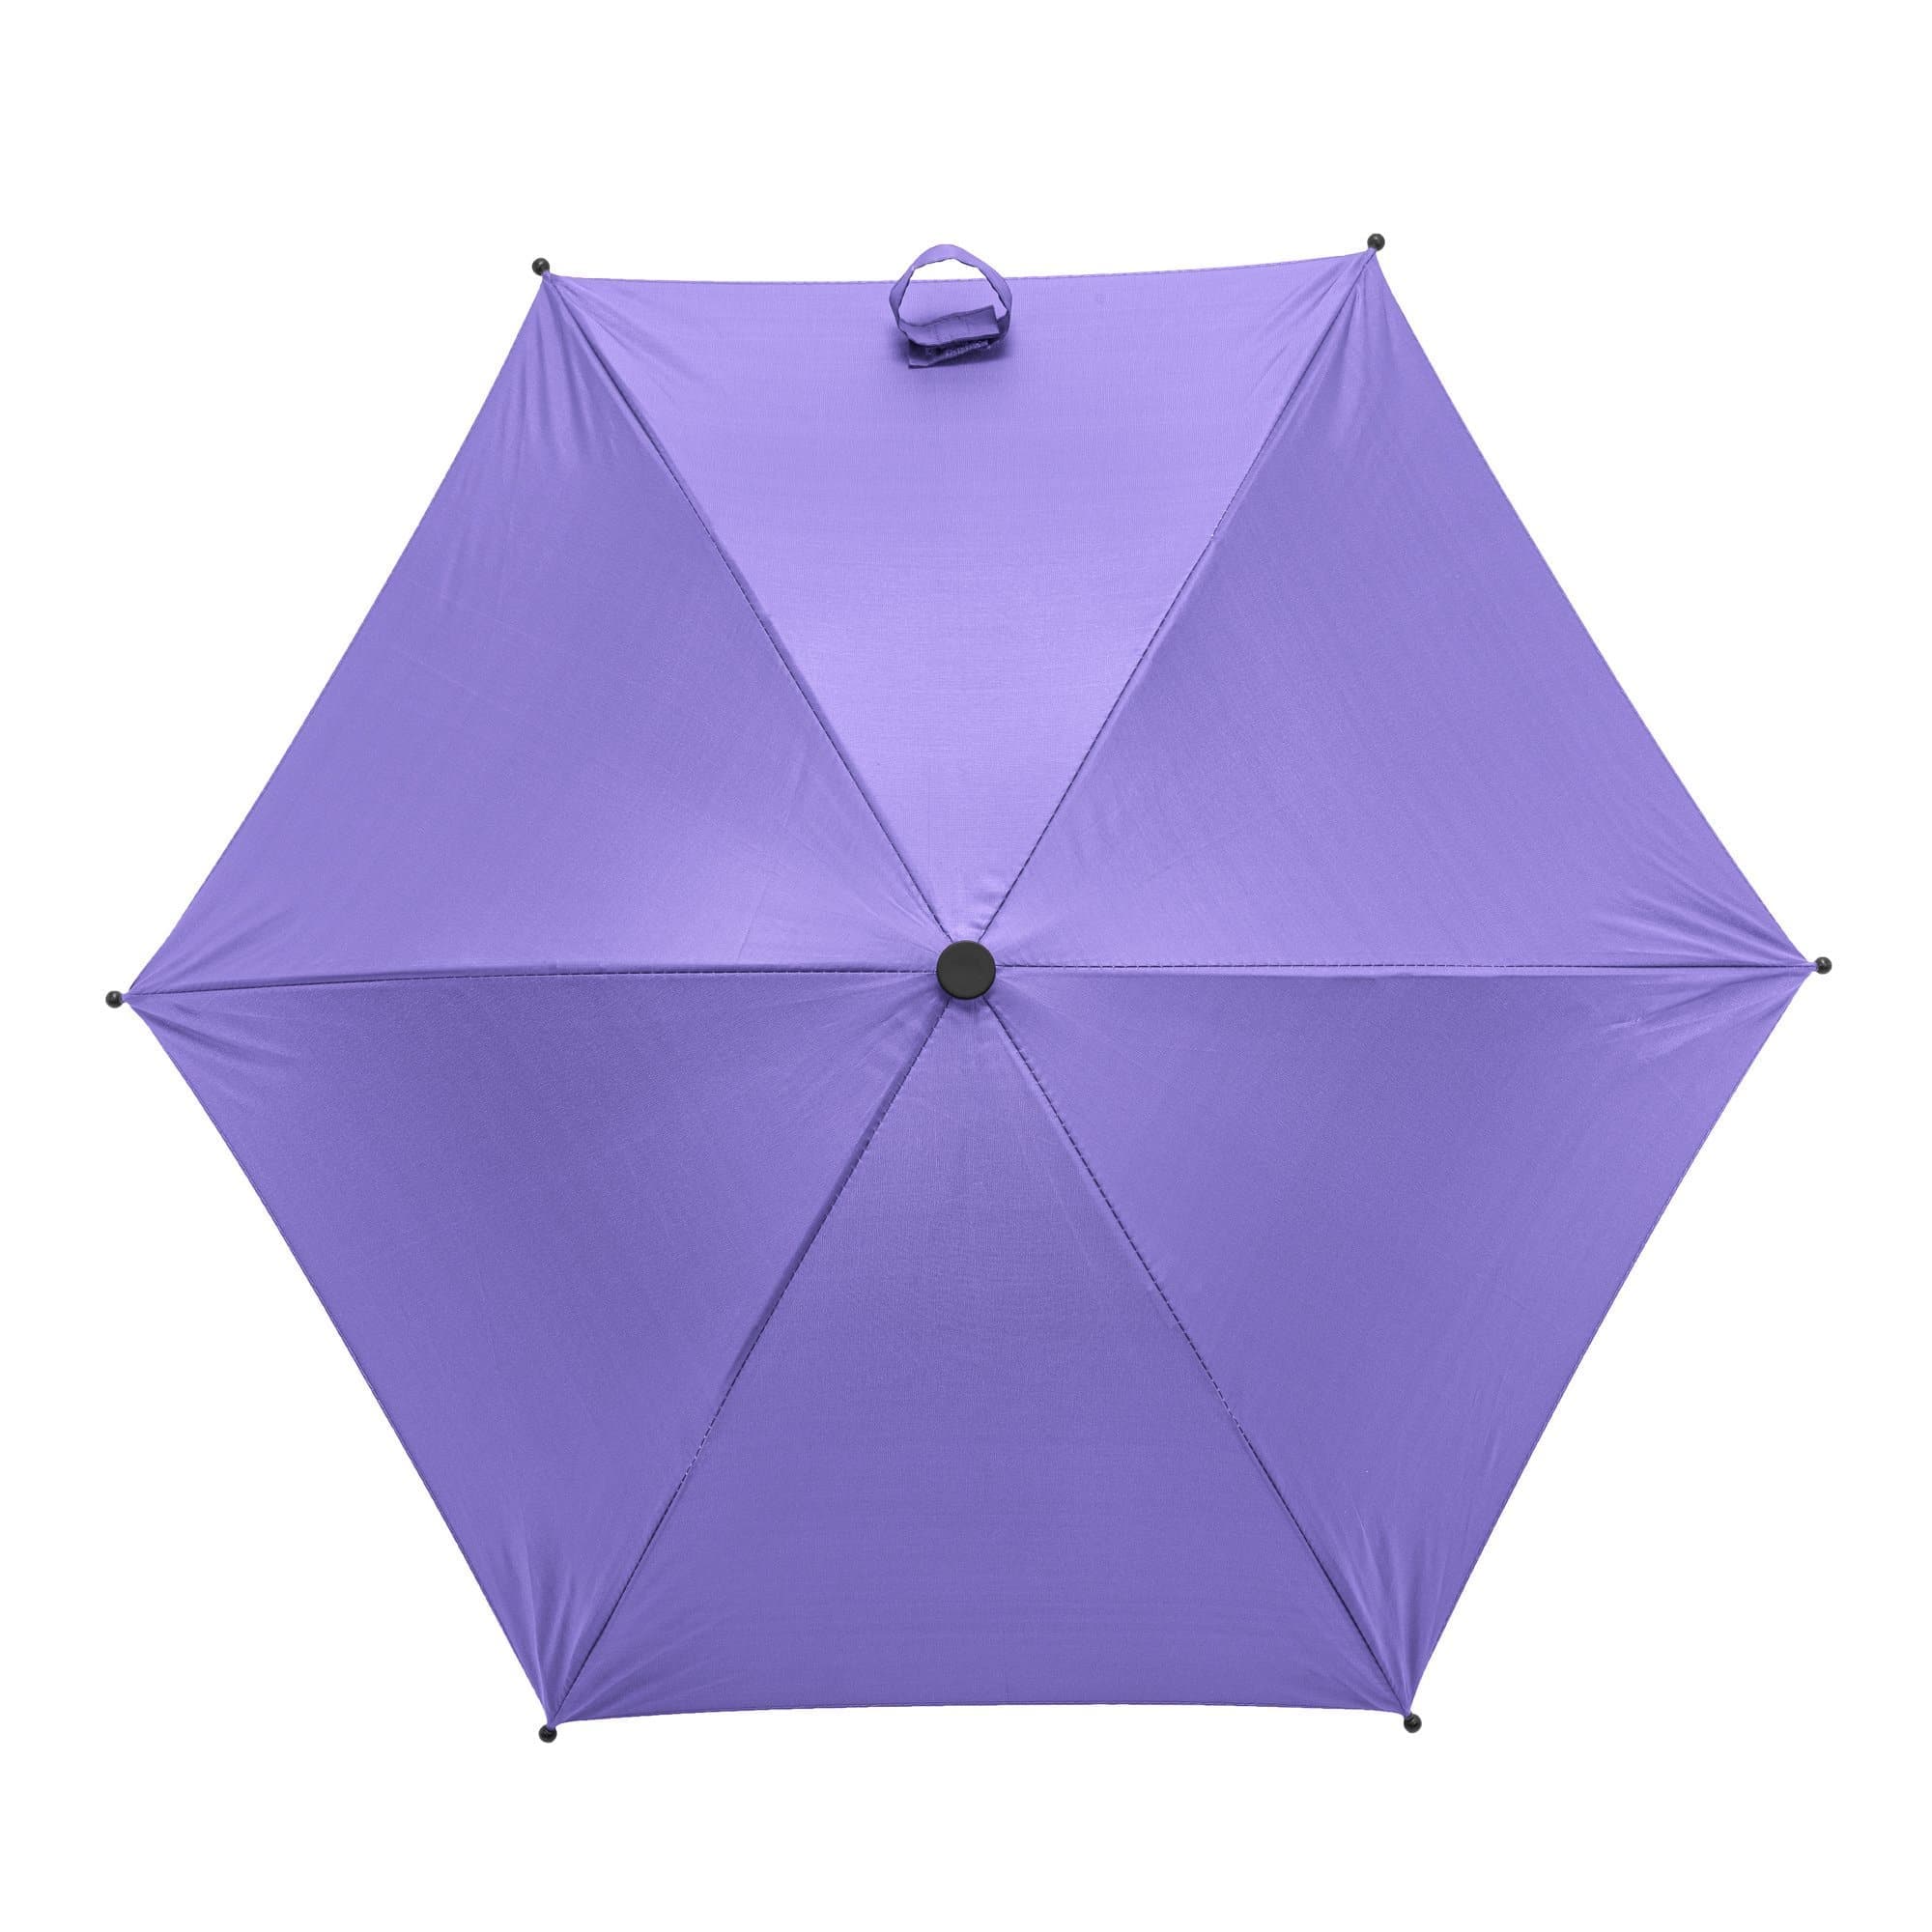 Baby Parasol Compatible With Hesba - Fits All Models - For Your Little One